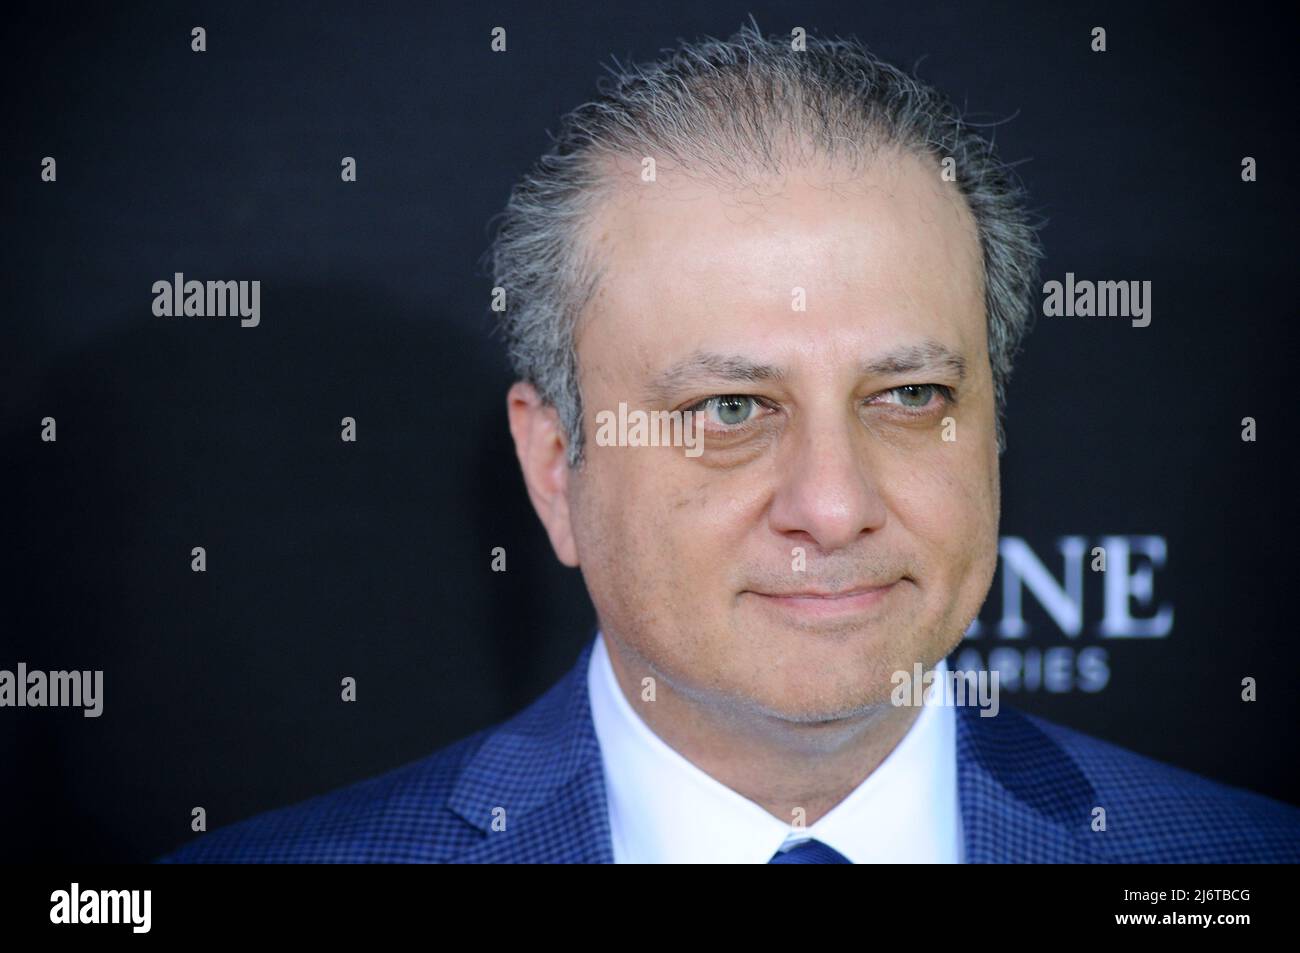 Preet Bharara attends the 'We Feed People' screening at the SVA Theater in New York City. (Photo by Efren Landaos / SOPA Images/Sipa USA) Stock Photo